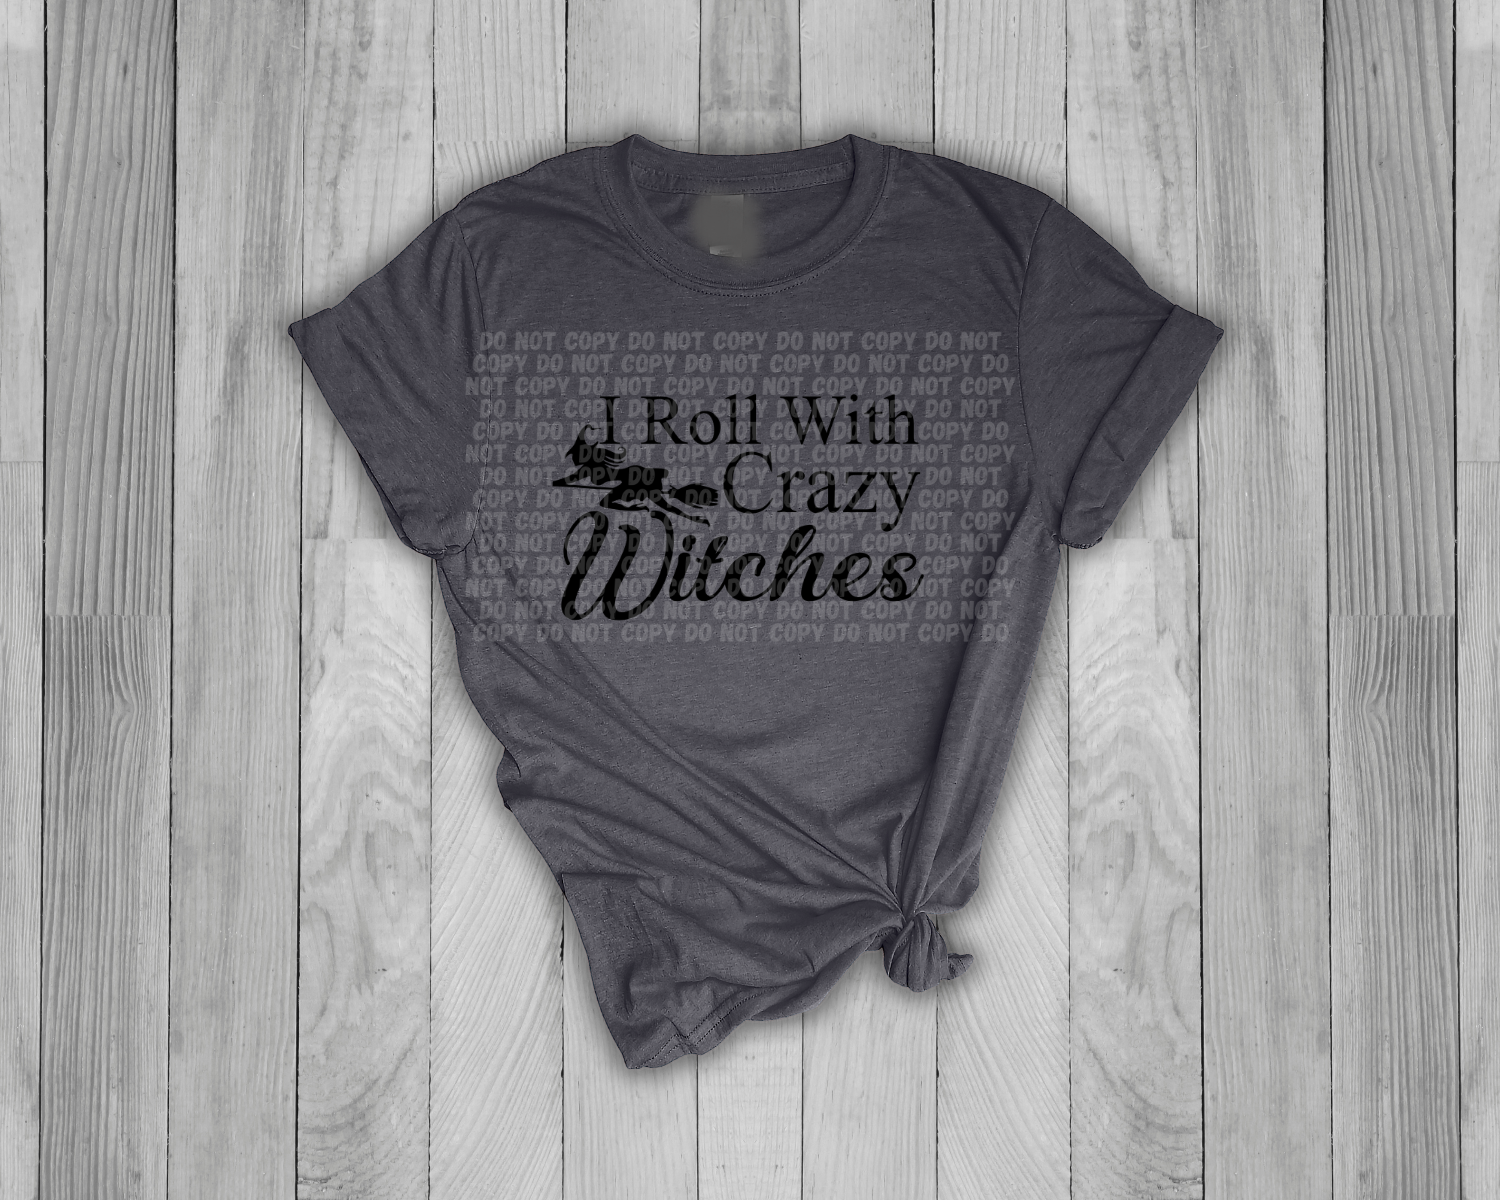 I Roll With Crazy Witches Shirt - Mayan Sub Shop